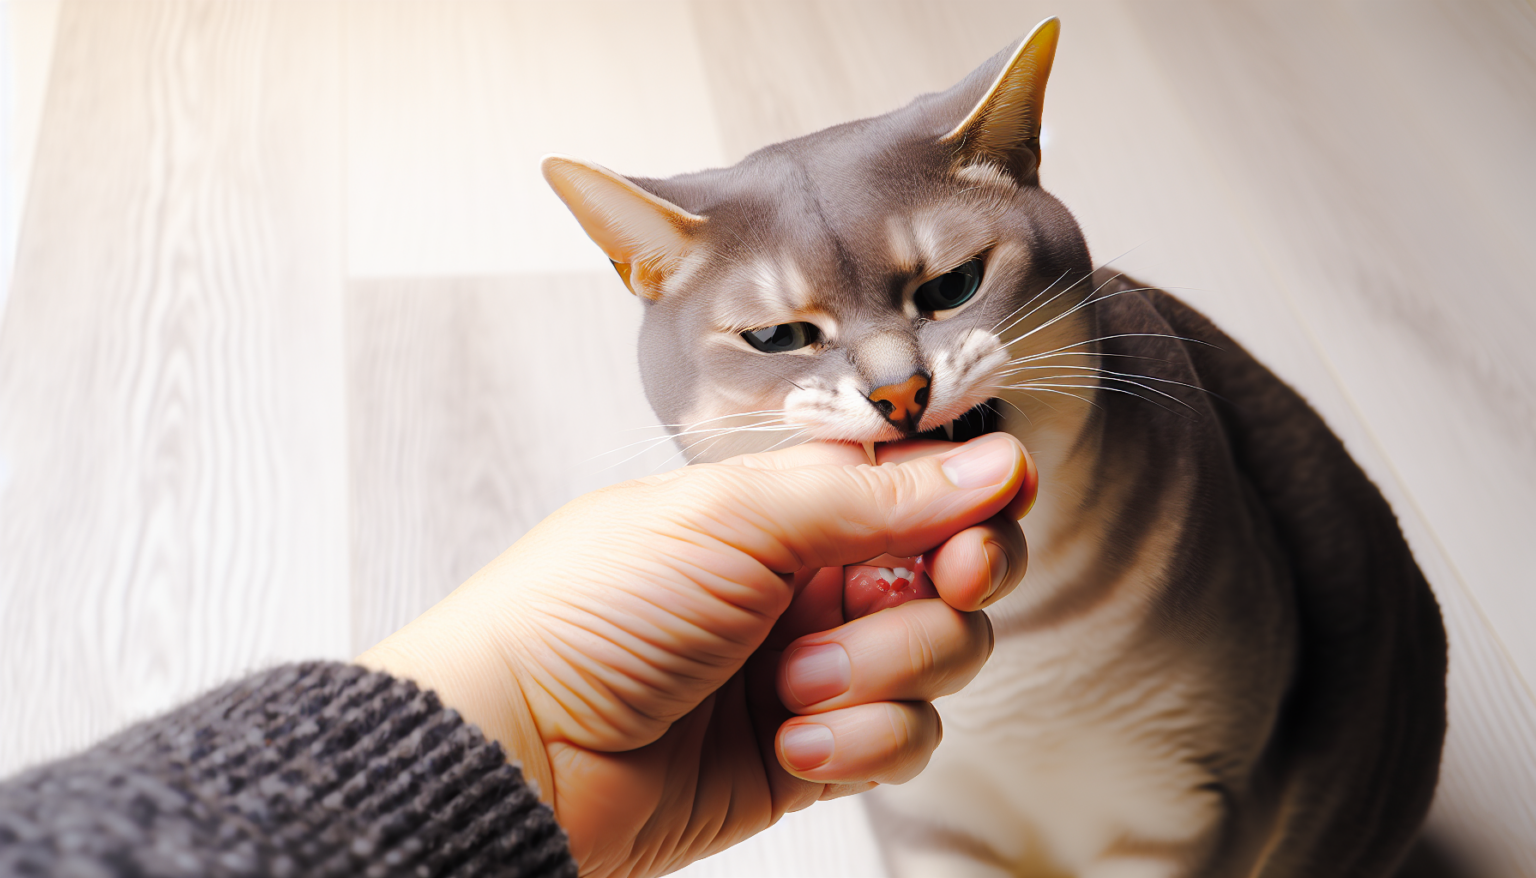 Pawtounes - Chats - Chatons - Animaux - Mignons - Marrants : Why does your cat bite your hand? Answers and solutions